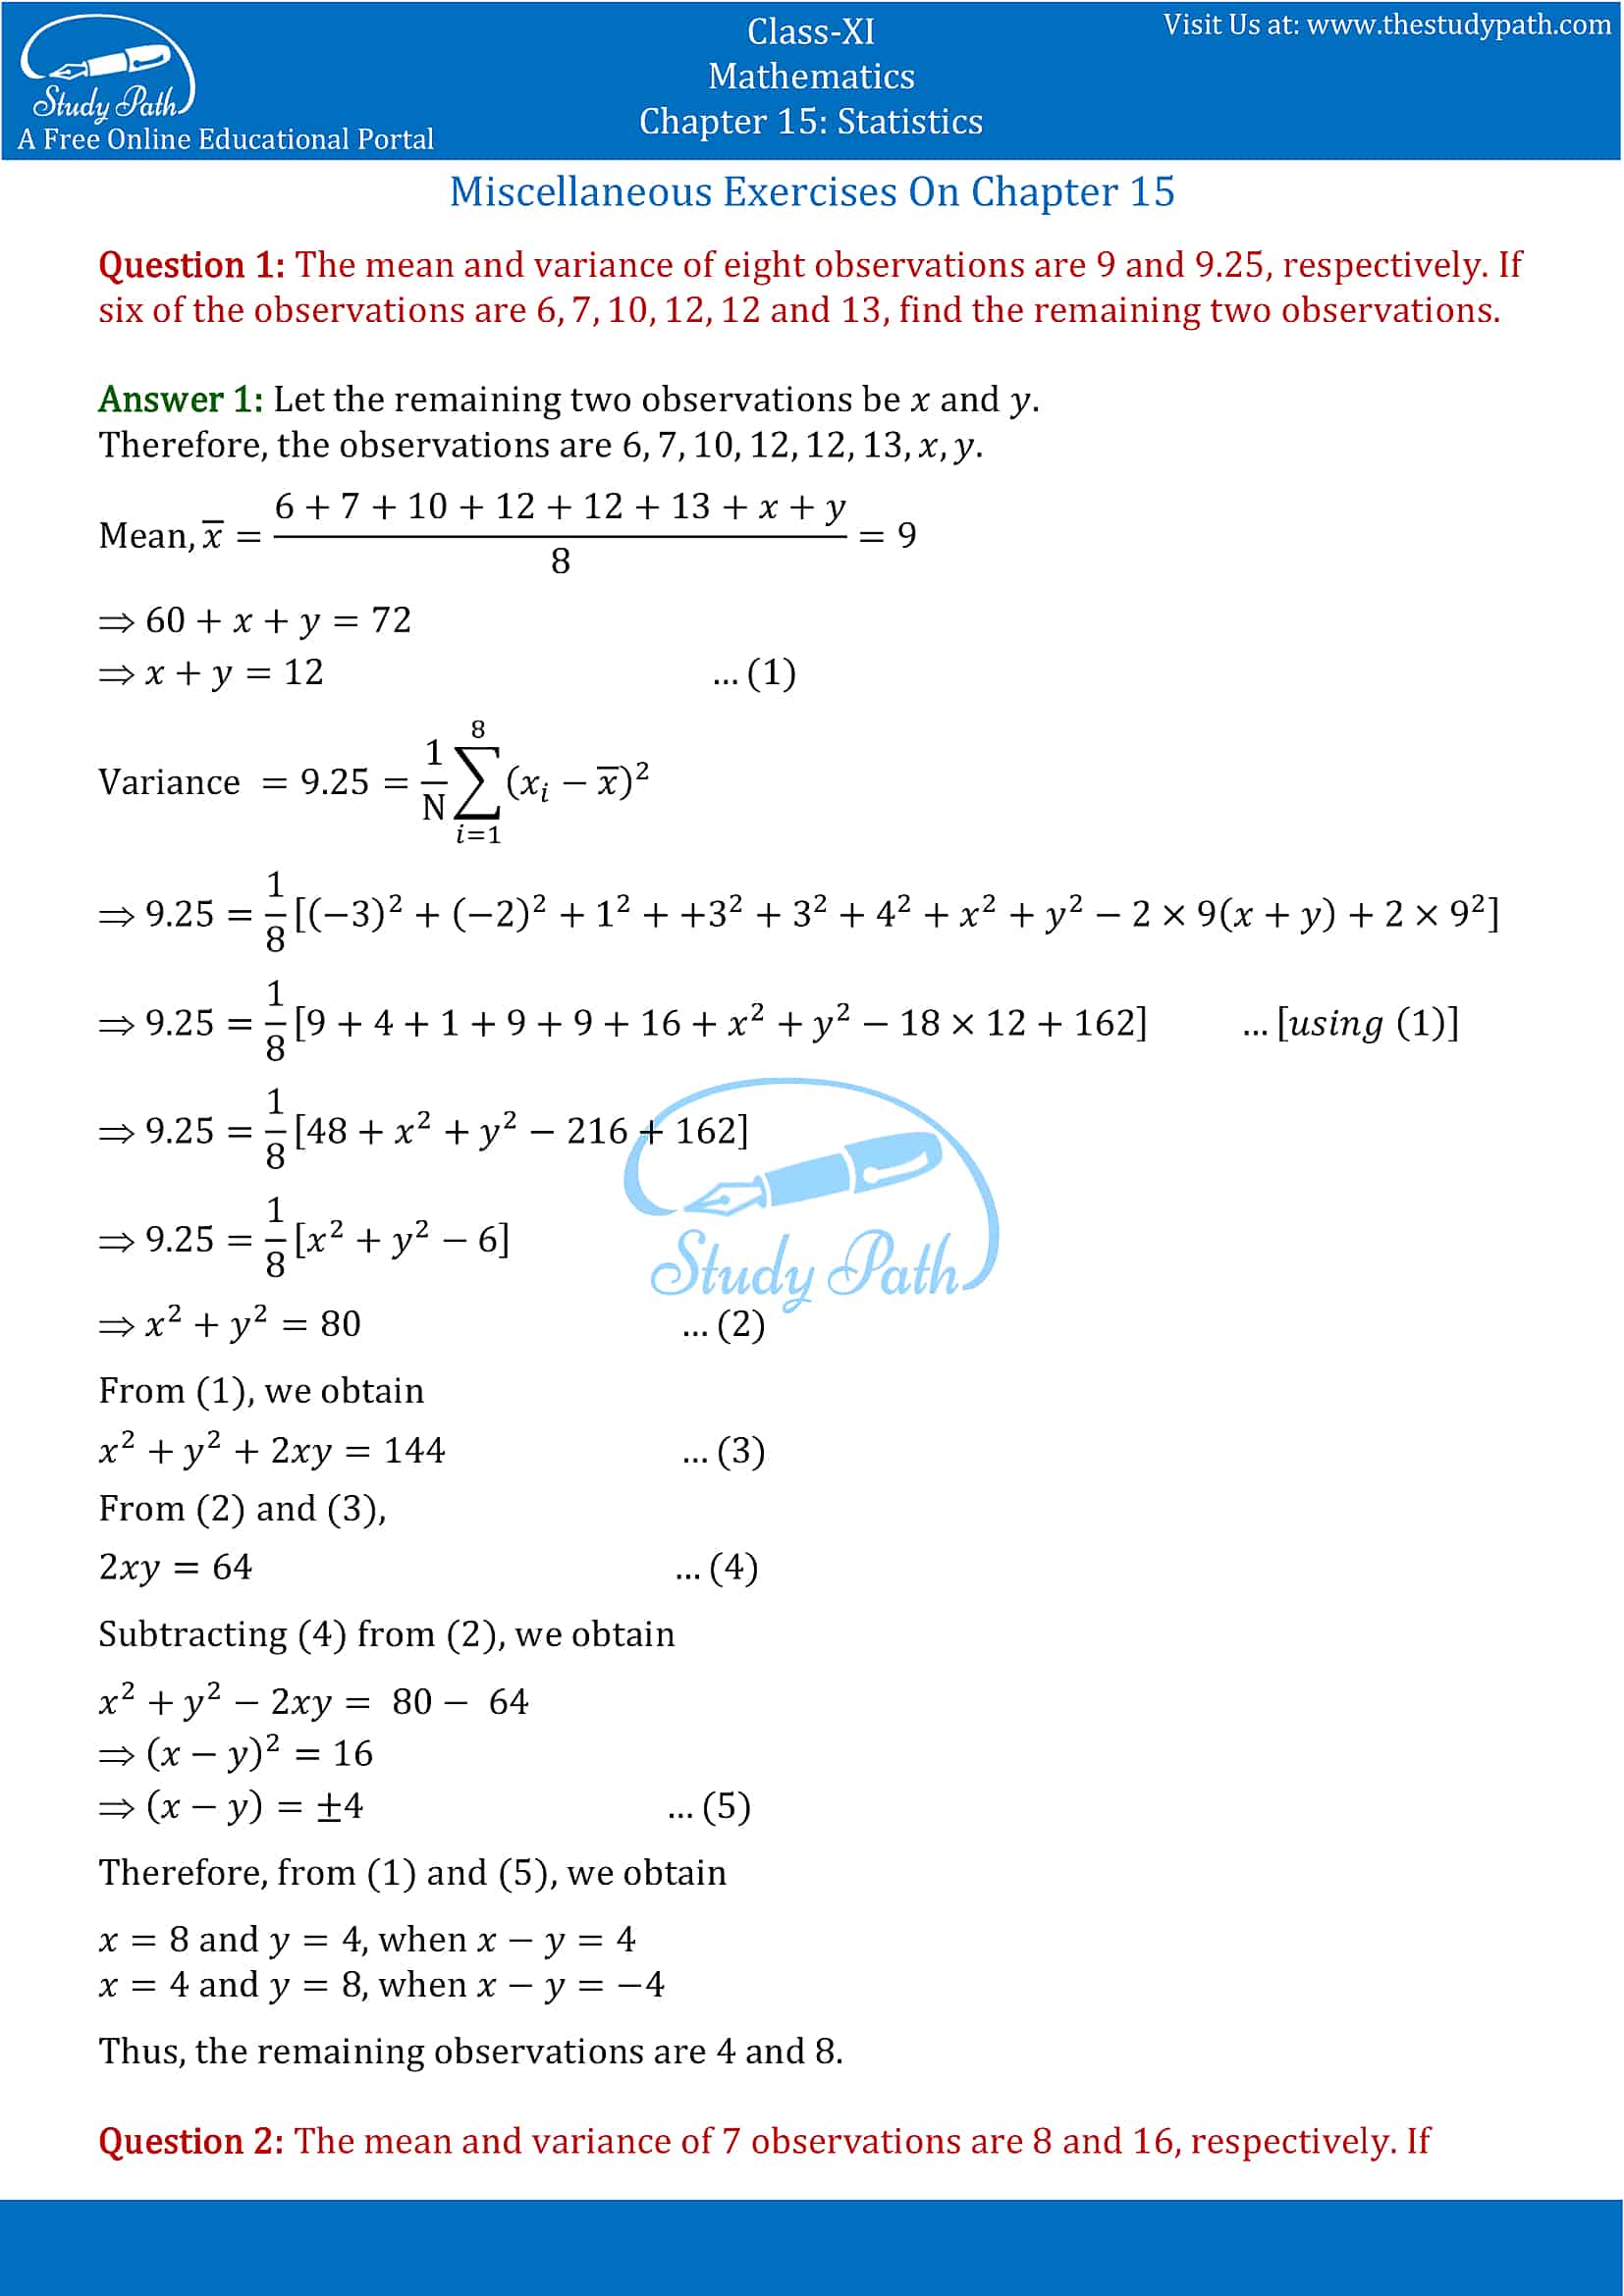 NCERT Solutions for Class 11 Maths chapter 15 Statistics Miscellaneous Exercise part-1